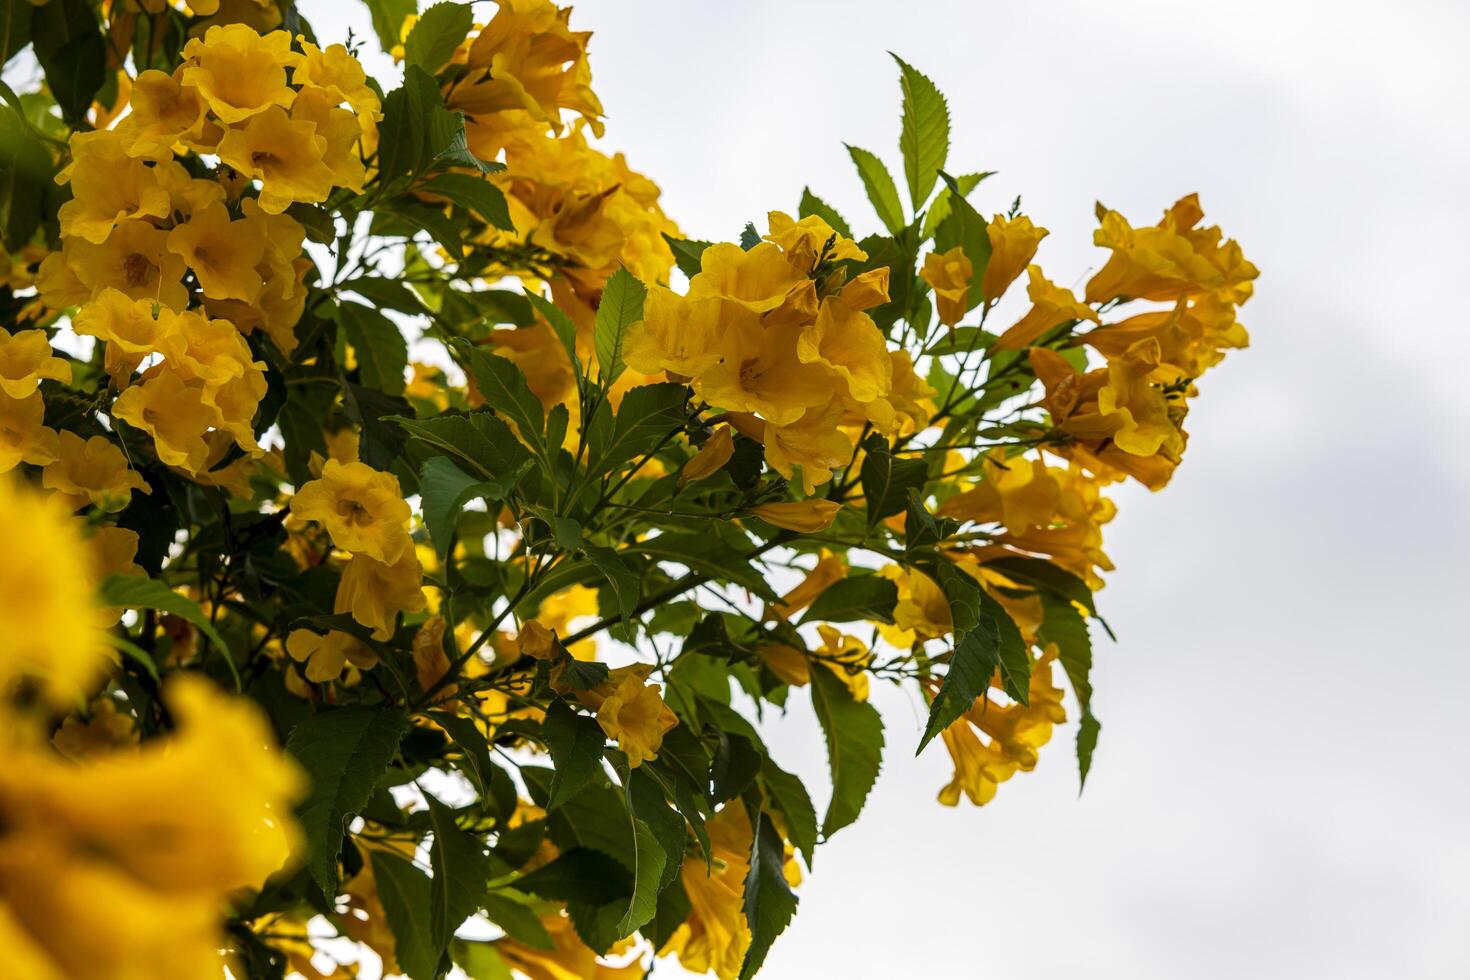 A close-up view of many yellow flowers resembling datura flowers blooming beautifully. photo